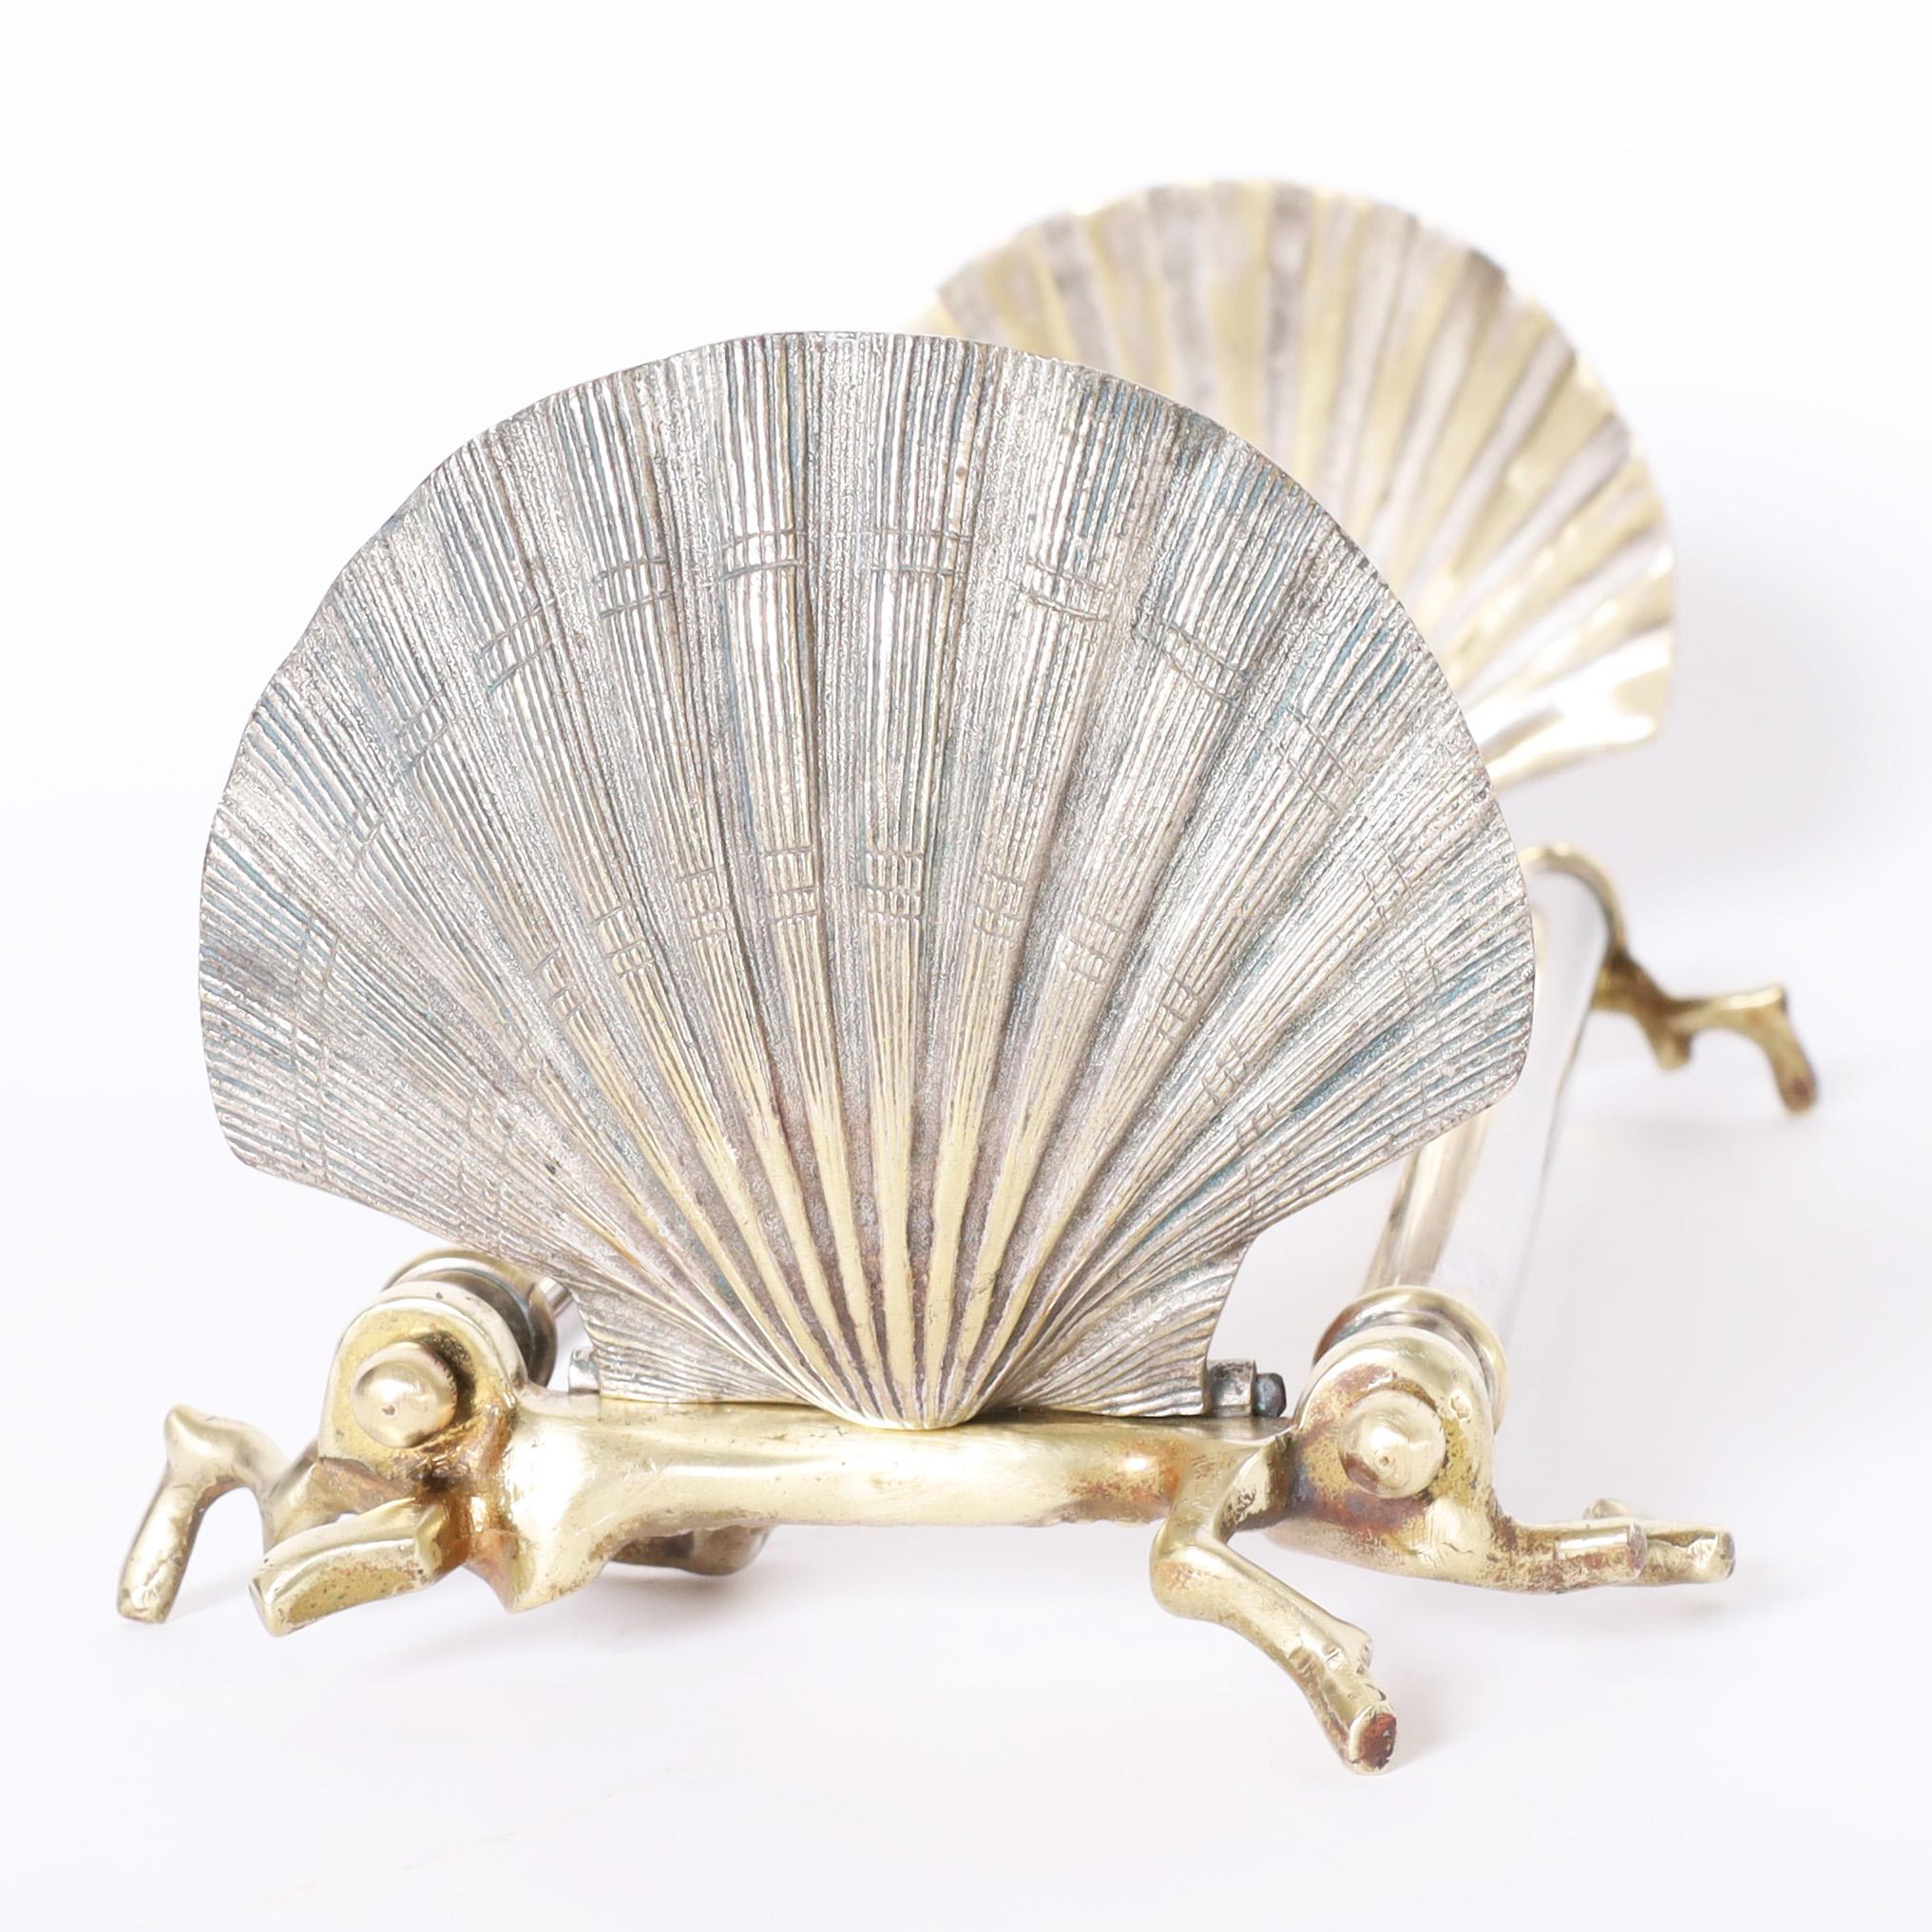 Unusual antique sea inspired bookends crafted with silver plate on brass rods and seashells at either end with faux coral brass feet.